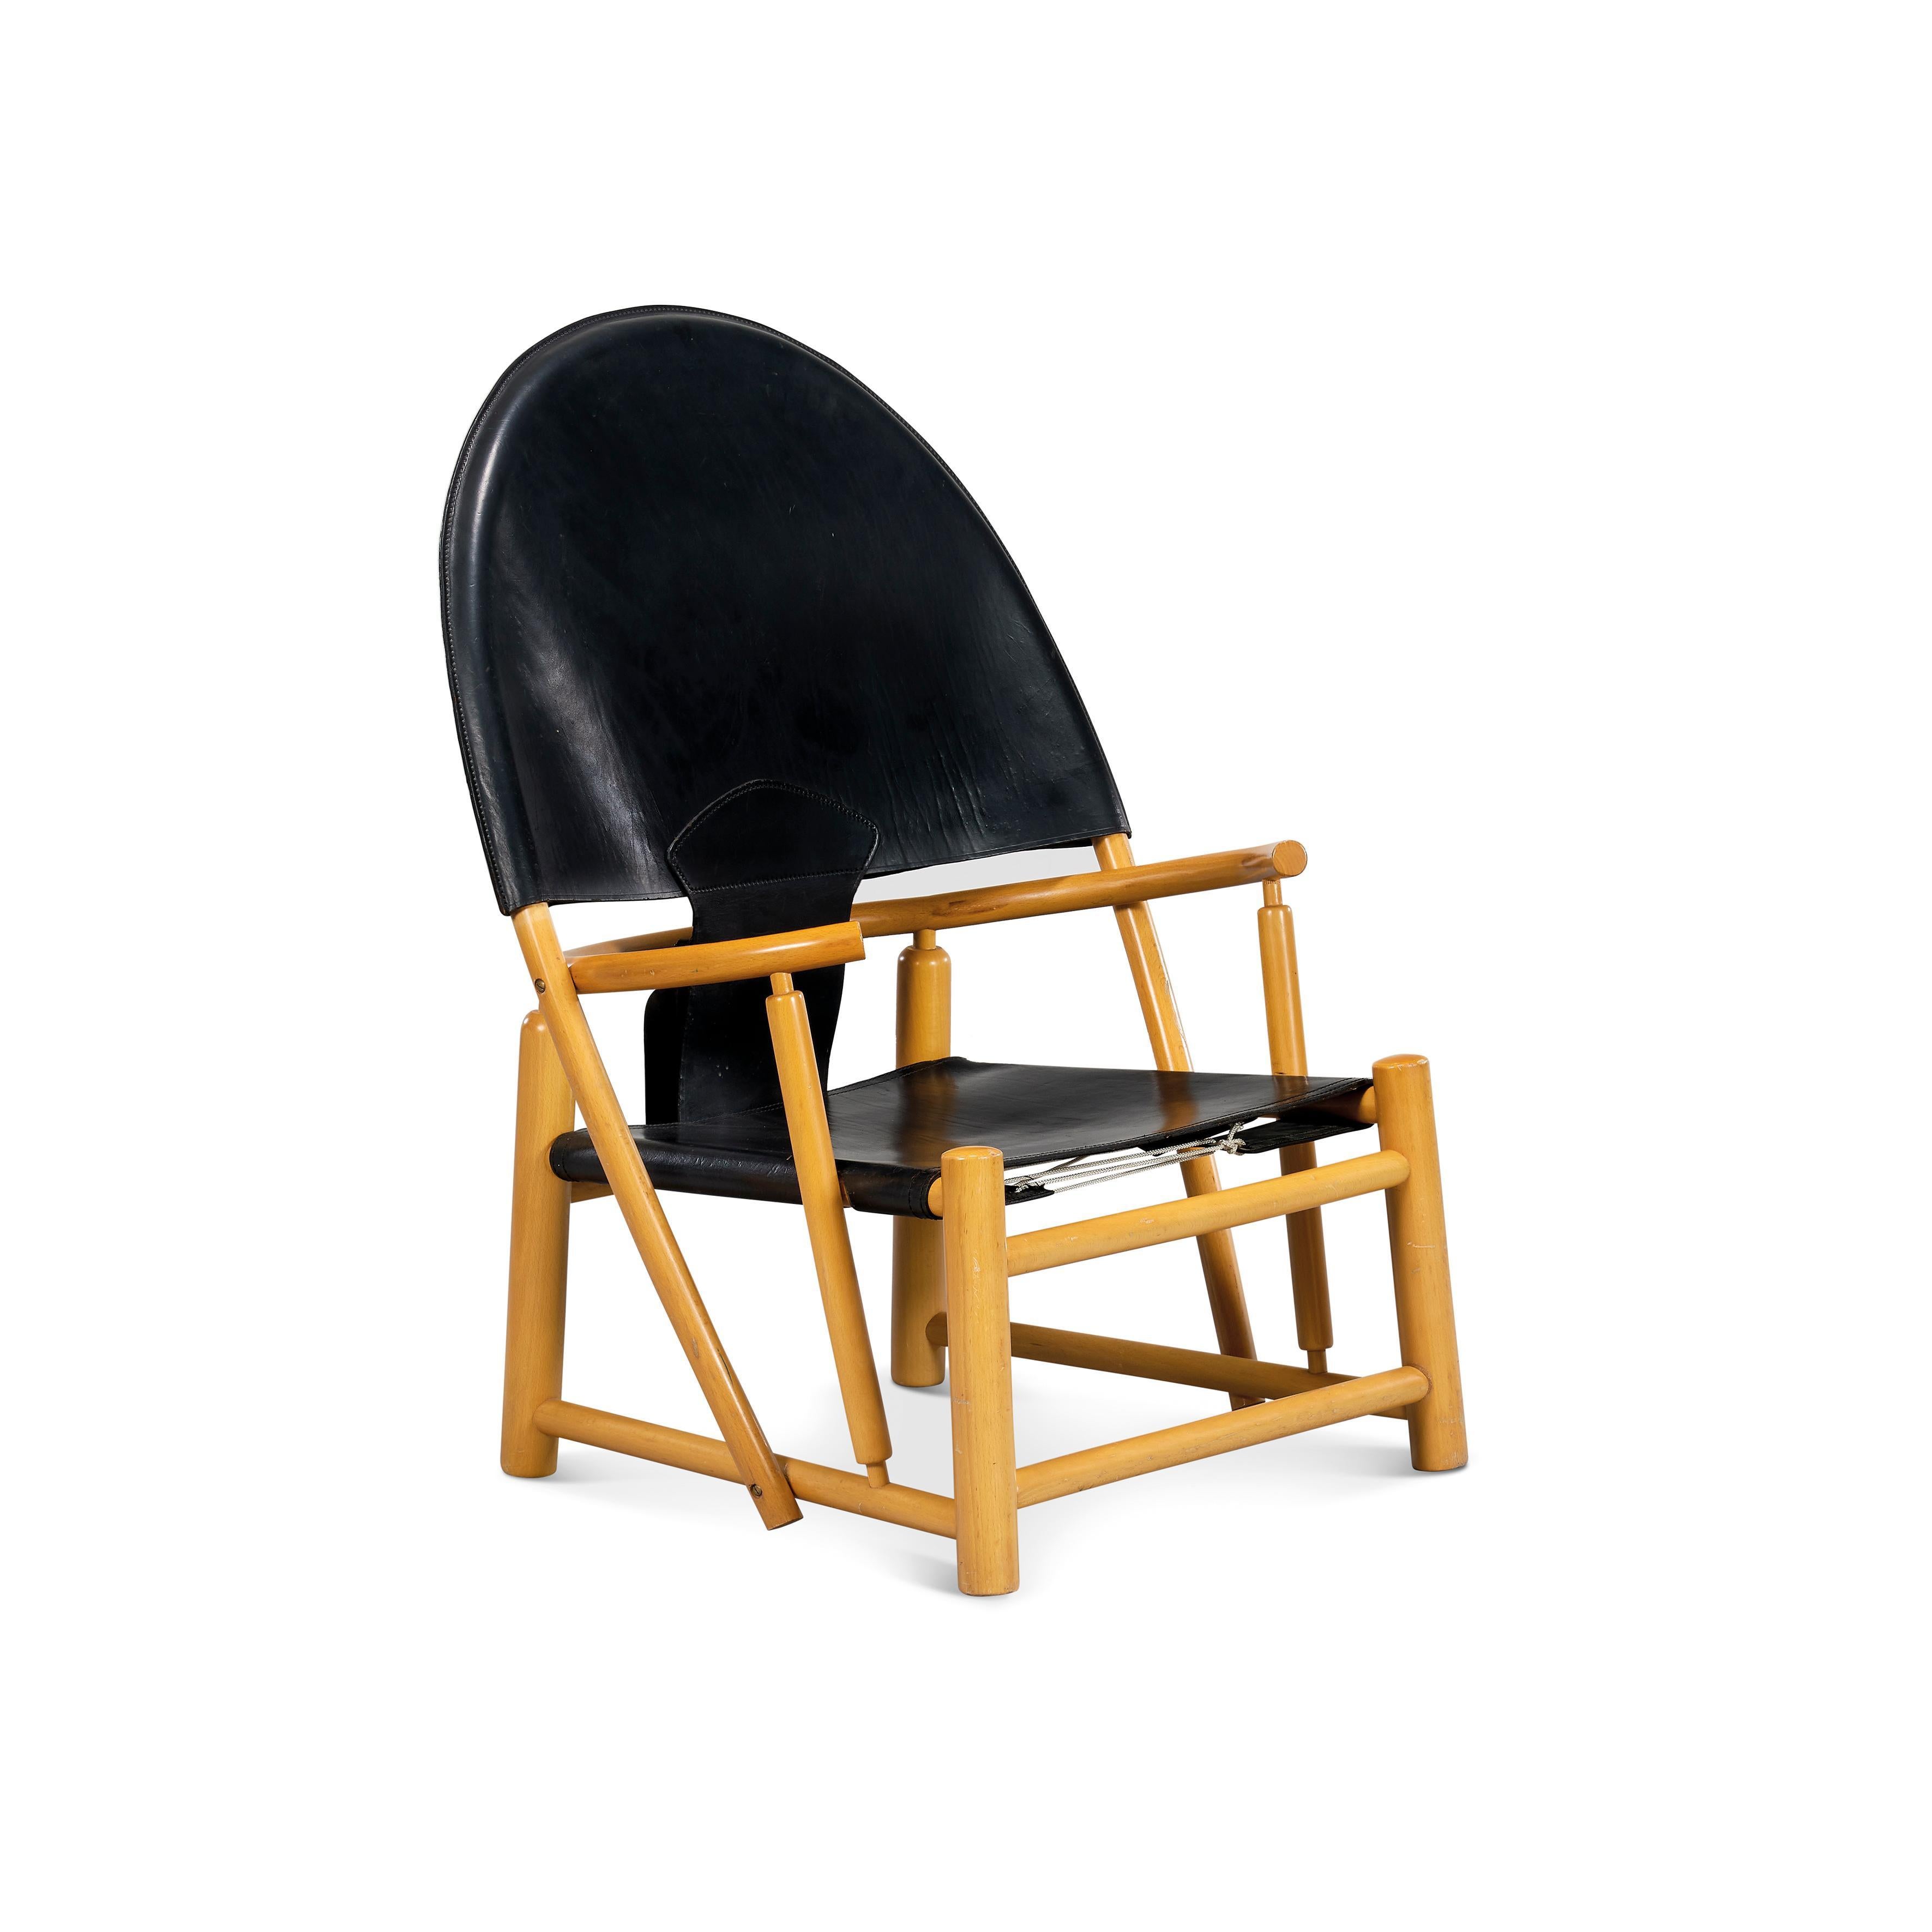 Hoop Armchair designed by Piero Palange and Werther Toffolon. Italy, Germa, 1972.  
Lacquered wooden frame with original leather upholstery. 
Very Good Condition.
Feel free to request a delivery rate and we will do our best to search for the most